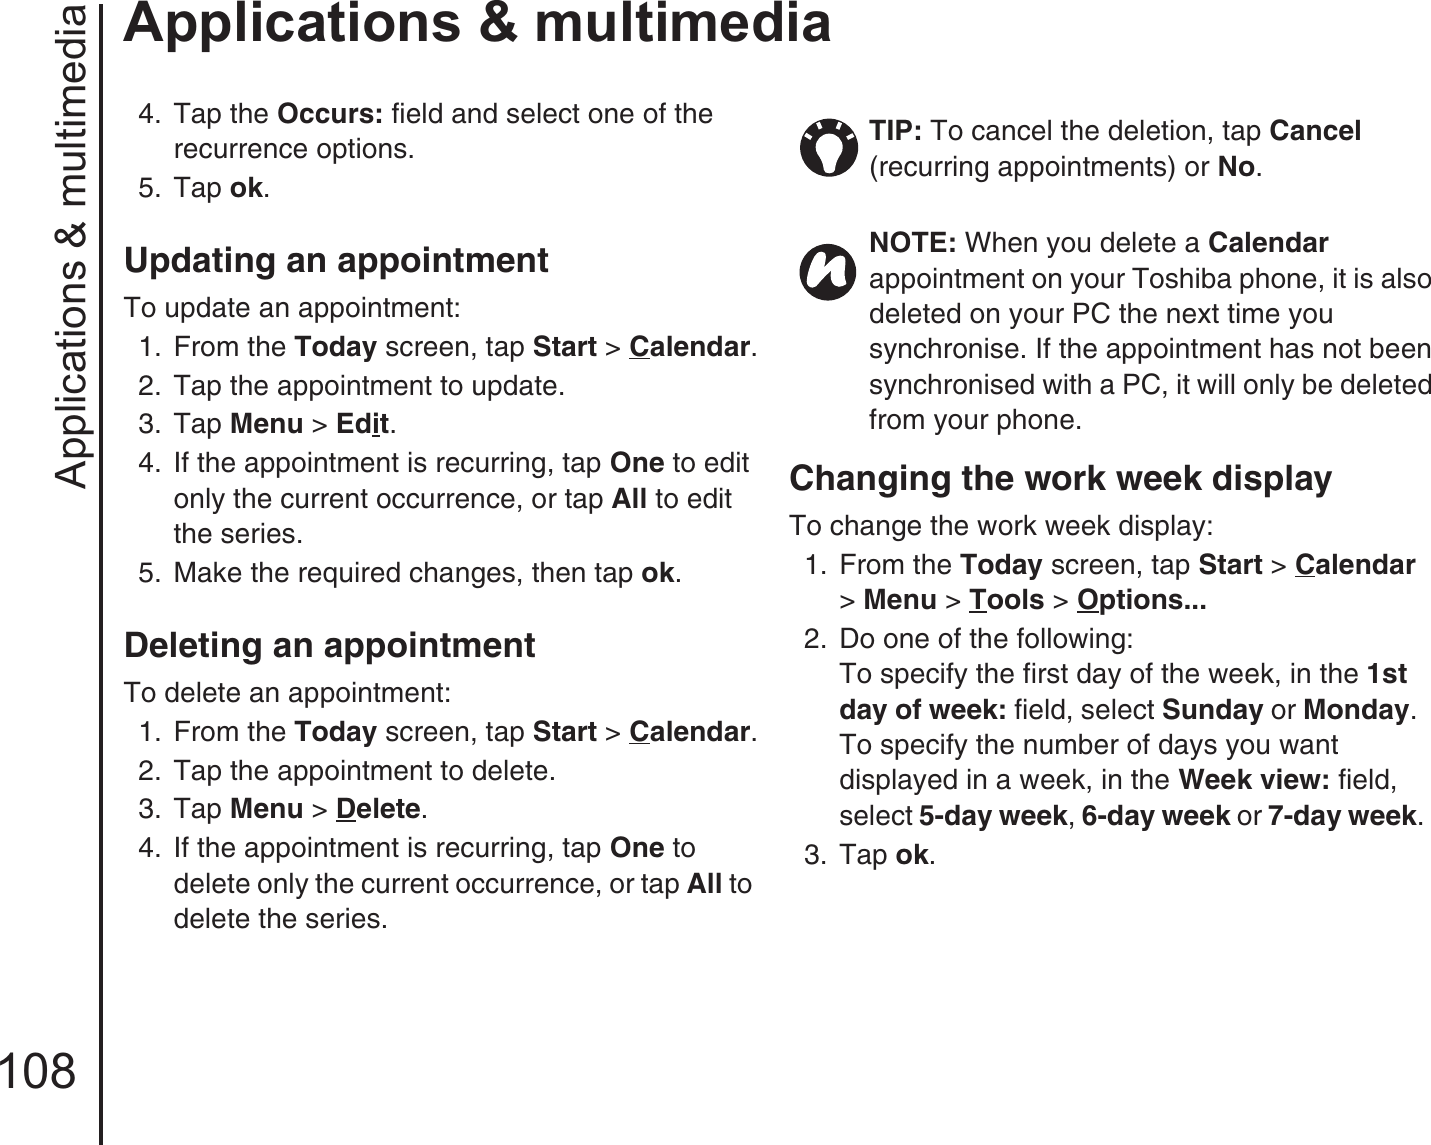 Applications &amp; multimedia108Applications &amp; multimedia4.  Tap the Occurs: field and select one of the recurrence options. 5.  Tap ok.Updating an appointment To update an appointment:1.  From the Today screen, tap Start &gt; Calendar.2.  Tap the appointment to update.3.  Tap Menu &gt; Edit.4.  If the appointment is recurring, tap One to edit only the current occurrence, or tap All to edit the series.5.  Make the required changes, then tap ok.Deleting an appointment To delete an appointment:1.  From the Today screen, tap Start &gt; Calendar.2.  Tap the appointment to delete.3.  Tap Menu &gt; Delete.4.  If the appointment is recurring, tap One to delete only the current occurrence, or tap All to delete the series.Changing the work week display To change the work week display:1.  From the Today screen, tap Start &gt; Calendar &gt; Menu &gt; Tools &gt; Options... 2.  Do one of the following: To specify the first day of the week, in the 1st day of week: field, select Sunday or Monday. To specify the number of days you want displayed in a week, in the Week view: field, select 5-day week, 6-day week or 7-day week.3.  Tap ok.TIP: To cancel the deletion, tap Cancel (recurring appointments) or No. NOTE: When you delete a Calendar appointment on your Toshiba phone, it is also deleted on your PC the next time you synchronise. If the appointment has not been synchronised with a PC, it will only be deleted from your phone.